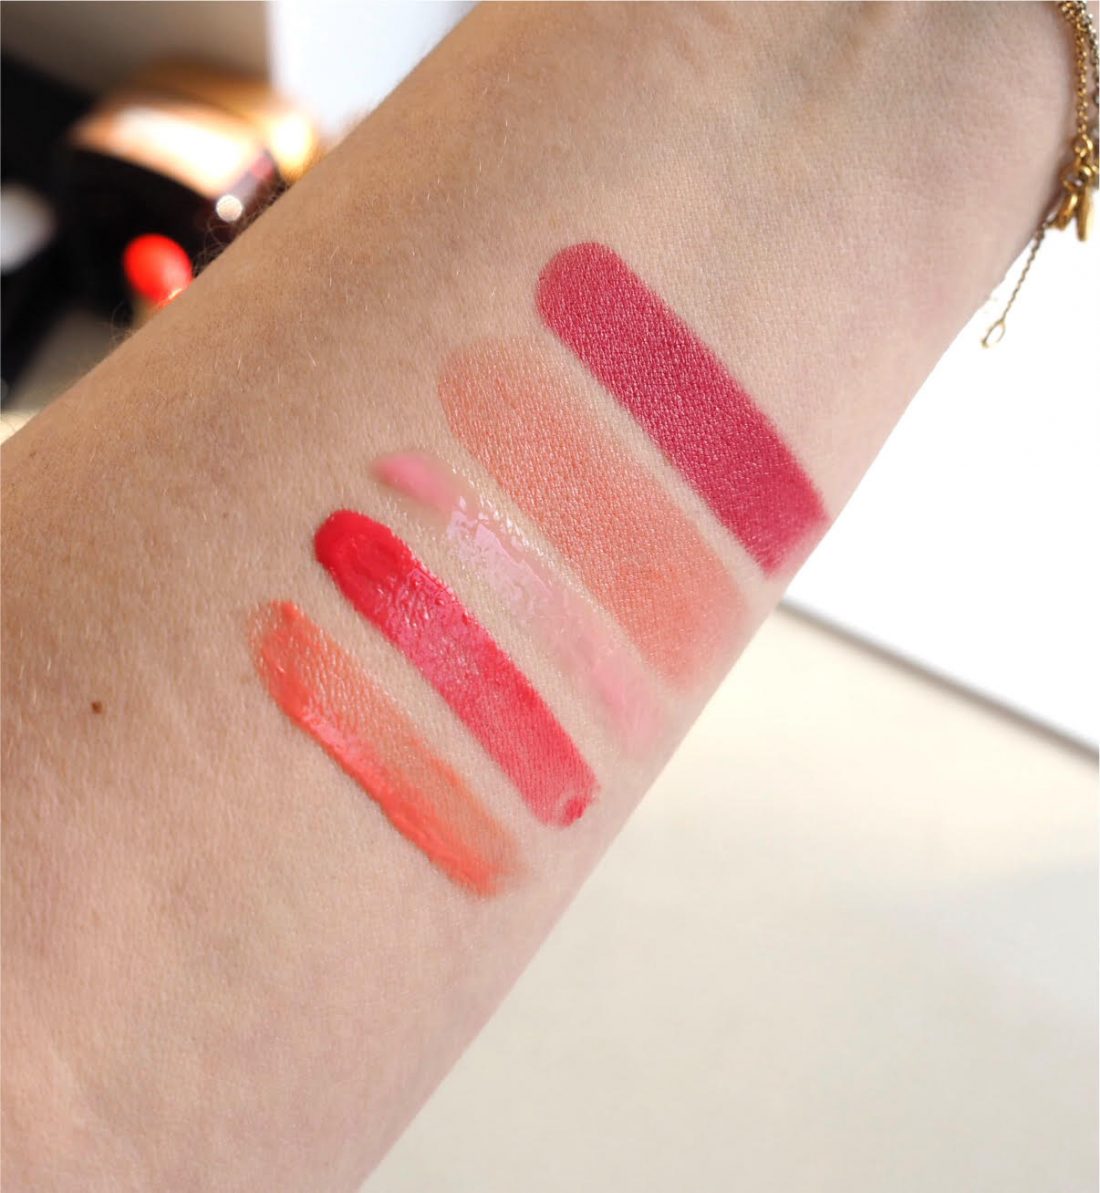 Chanel Summer 2020 New Shades of Rouge Coco Flash  Le Vernis  Beauty  Trends and Latest Makeup Collections  Chic Profile